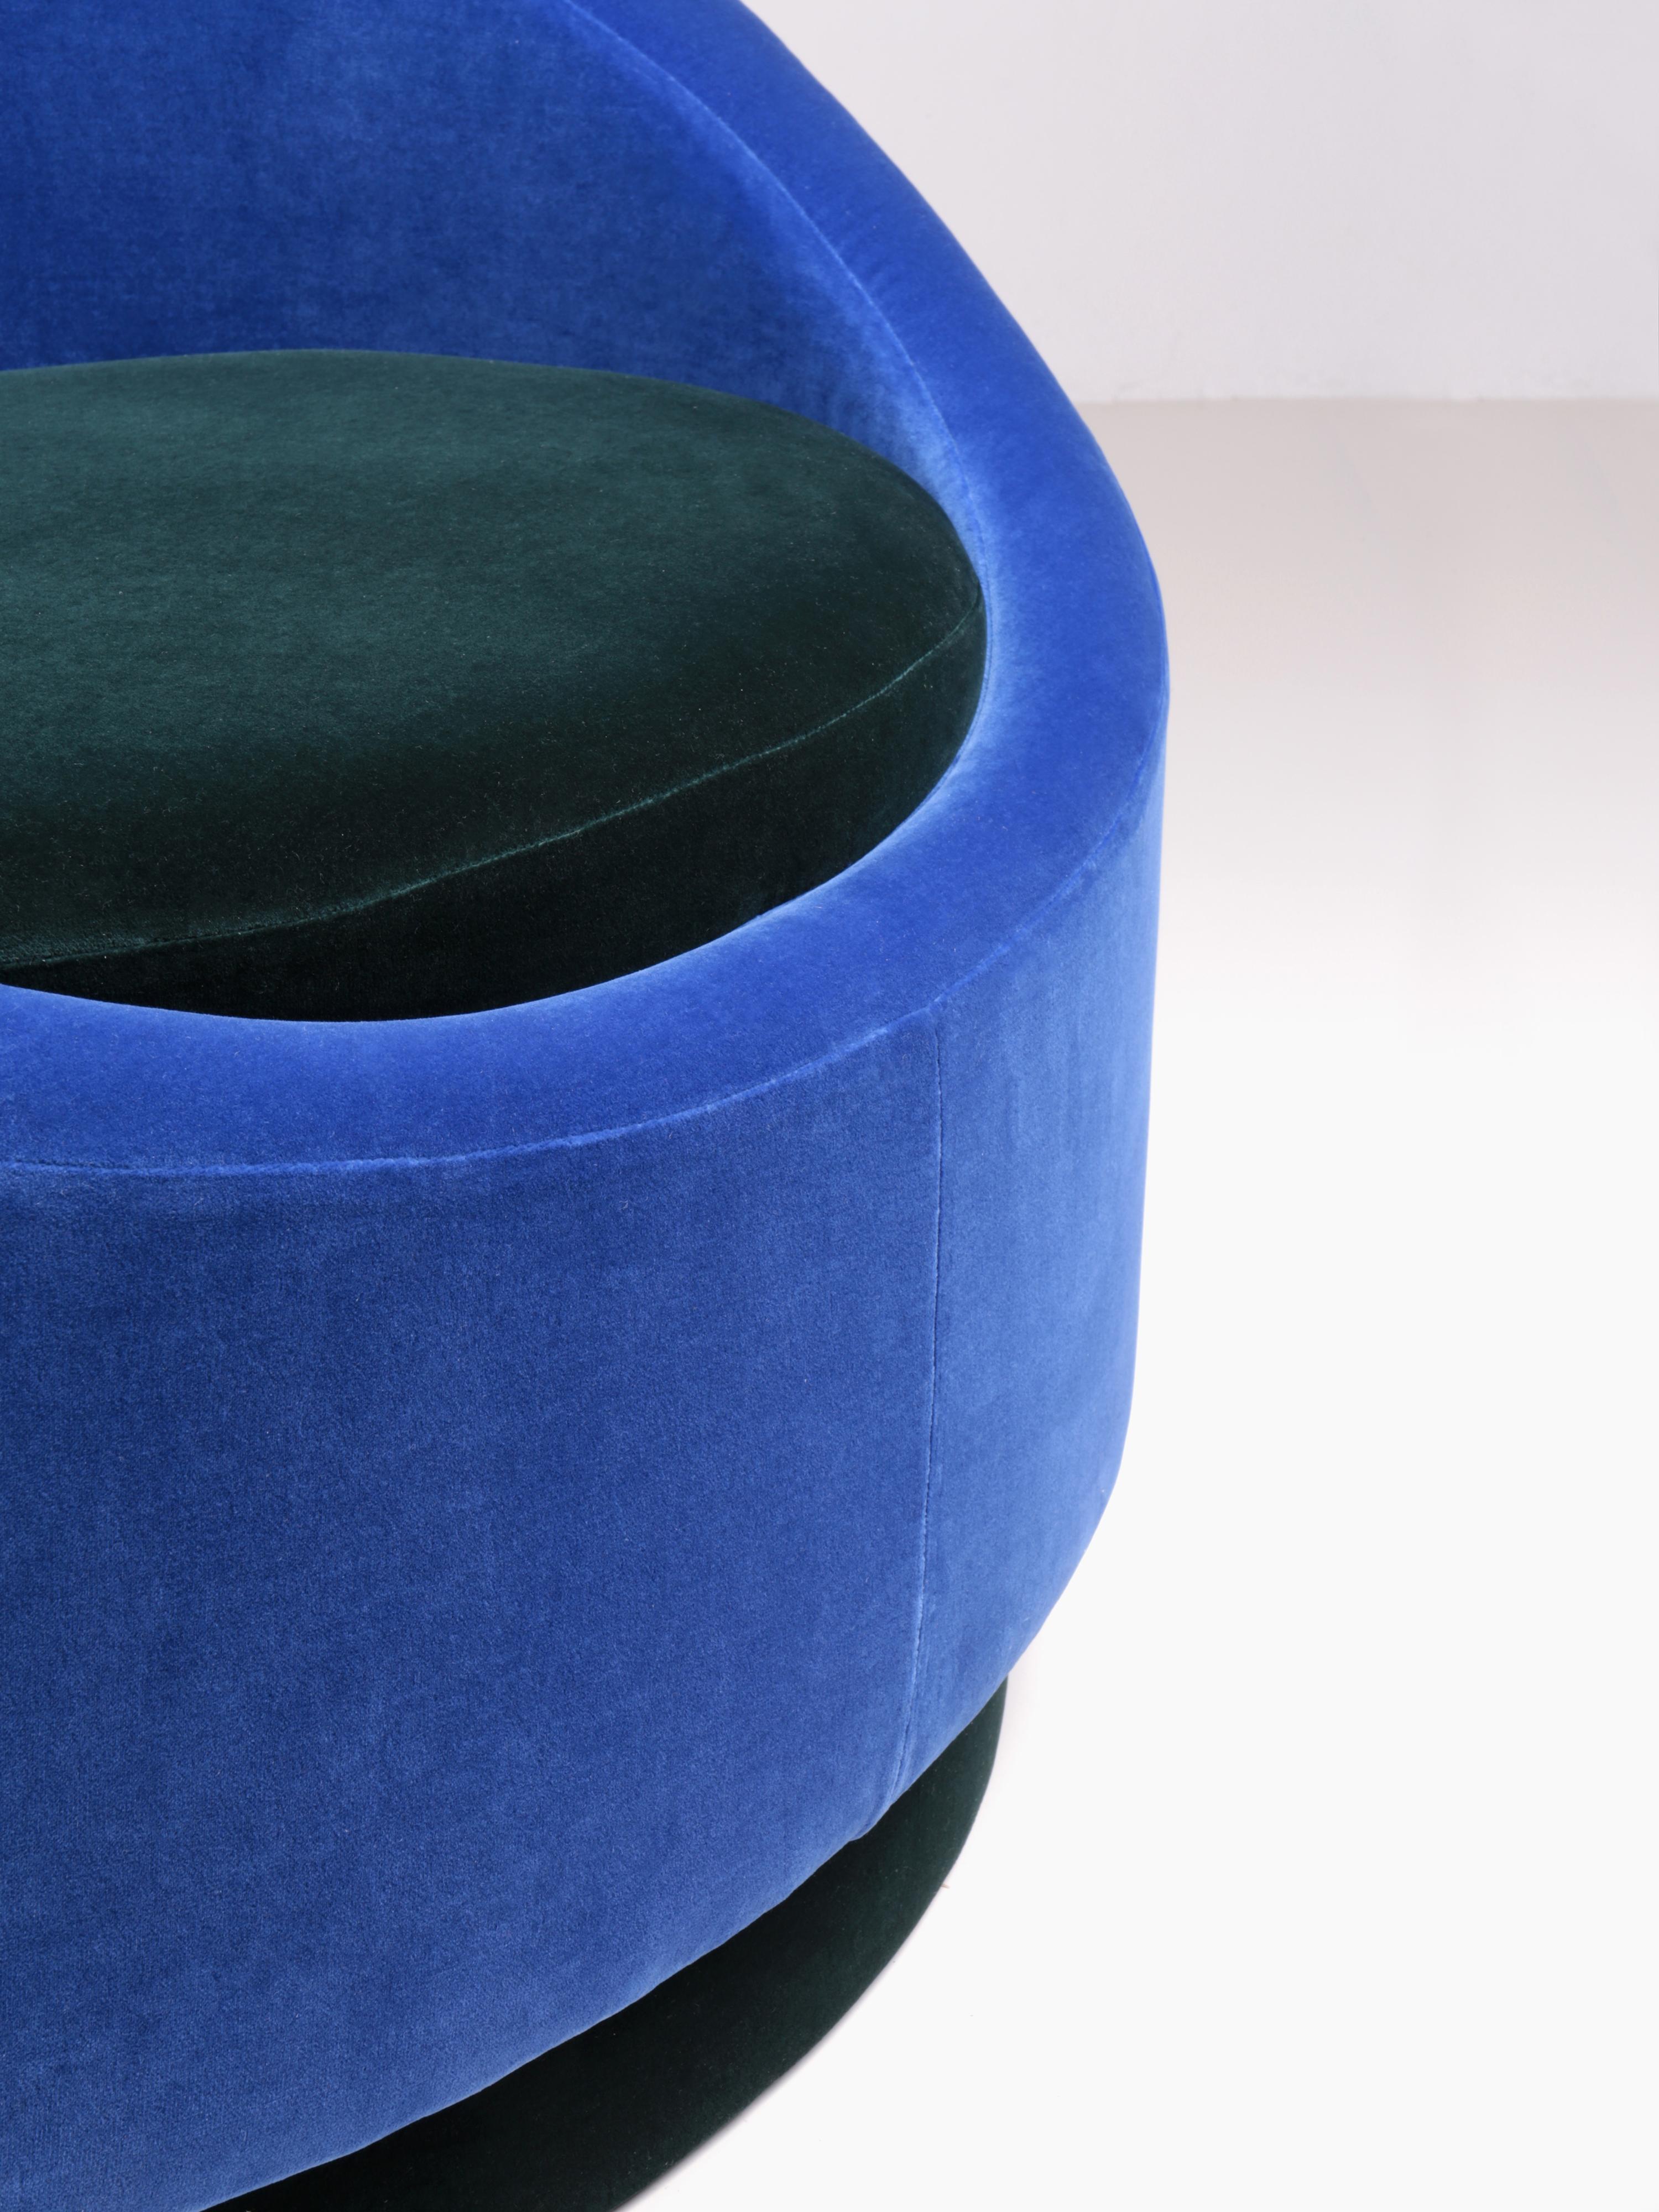 Contemporary All Around Armchair by Pierre Gonalons Kvadrat Fabric Paradisoterrestre Edition For Sale